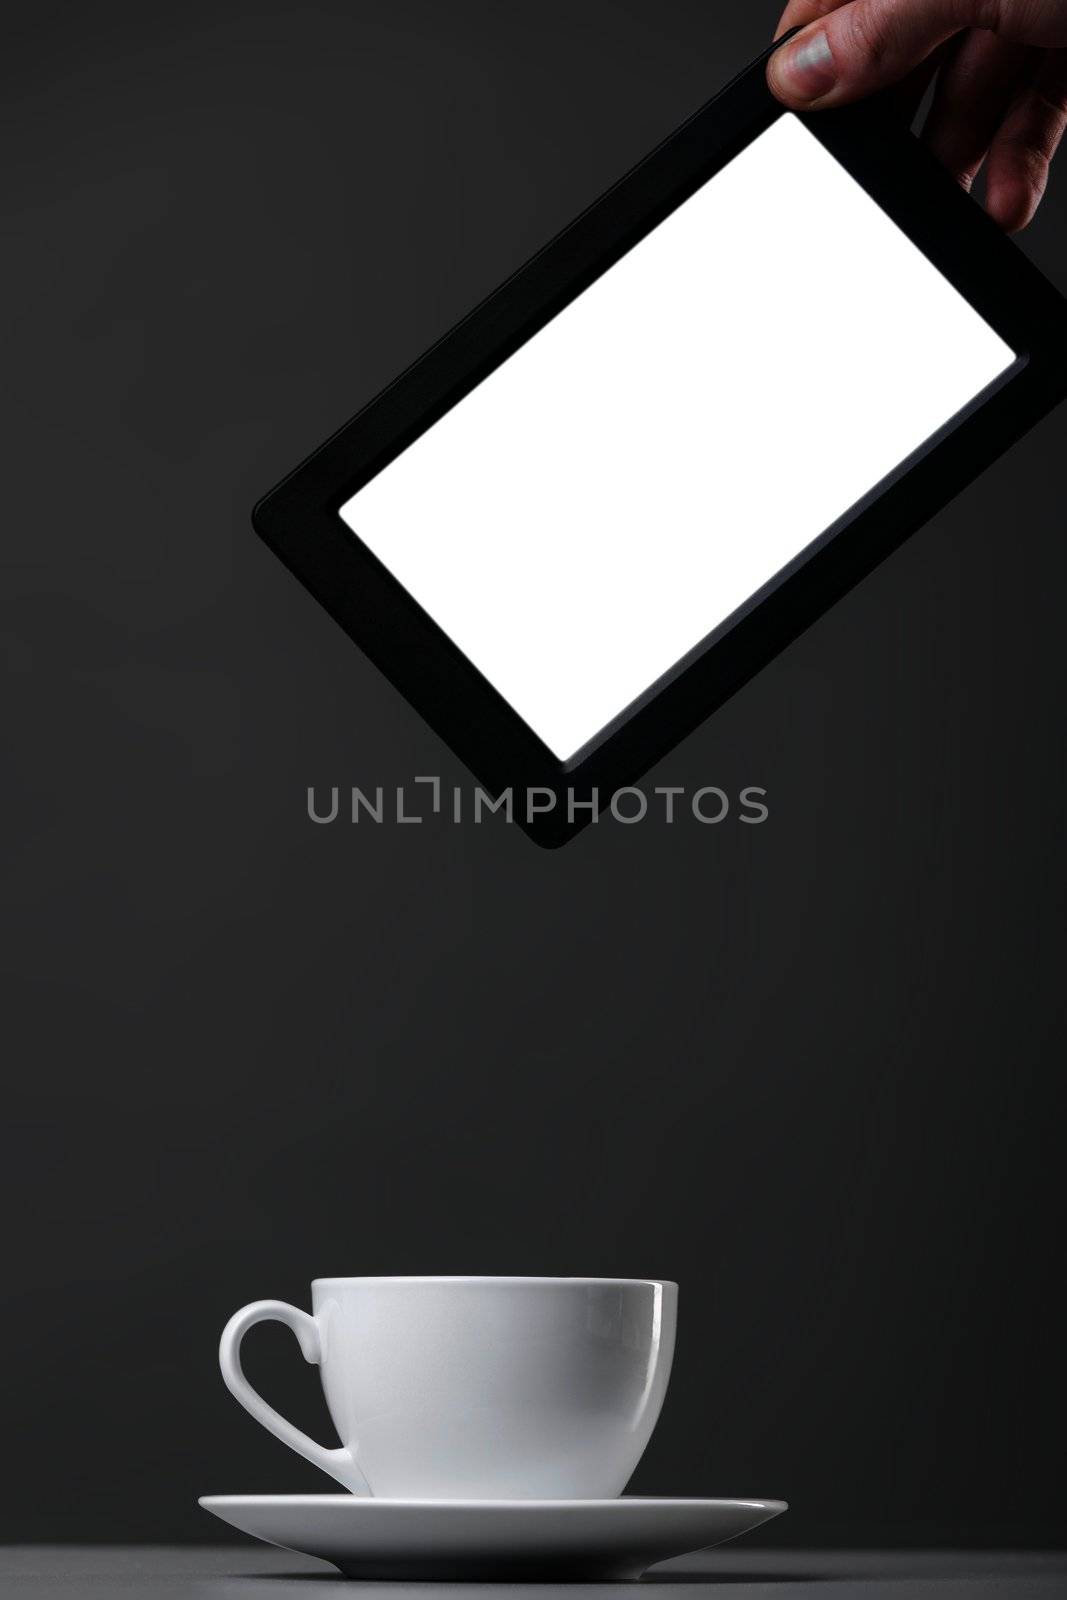 White mug and tablet computer on a gray background.